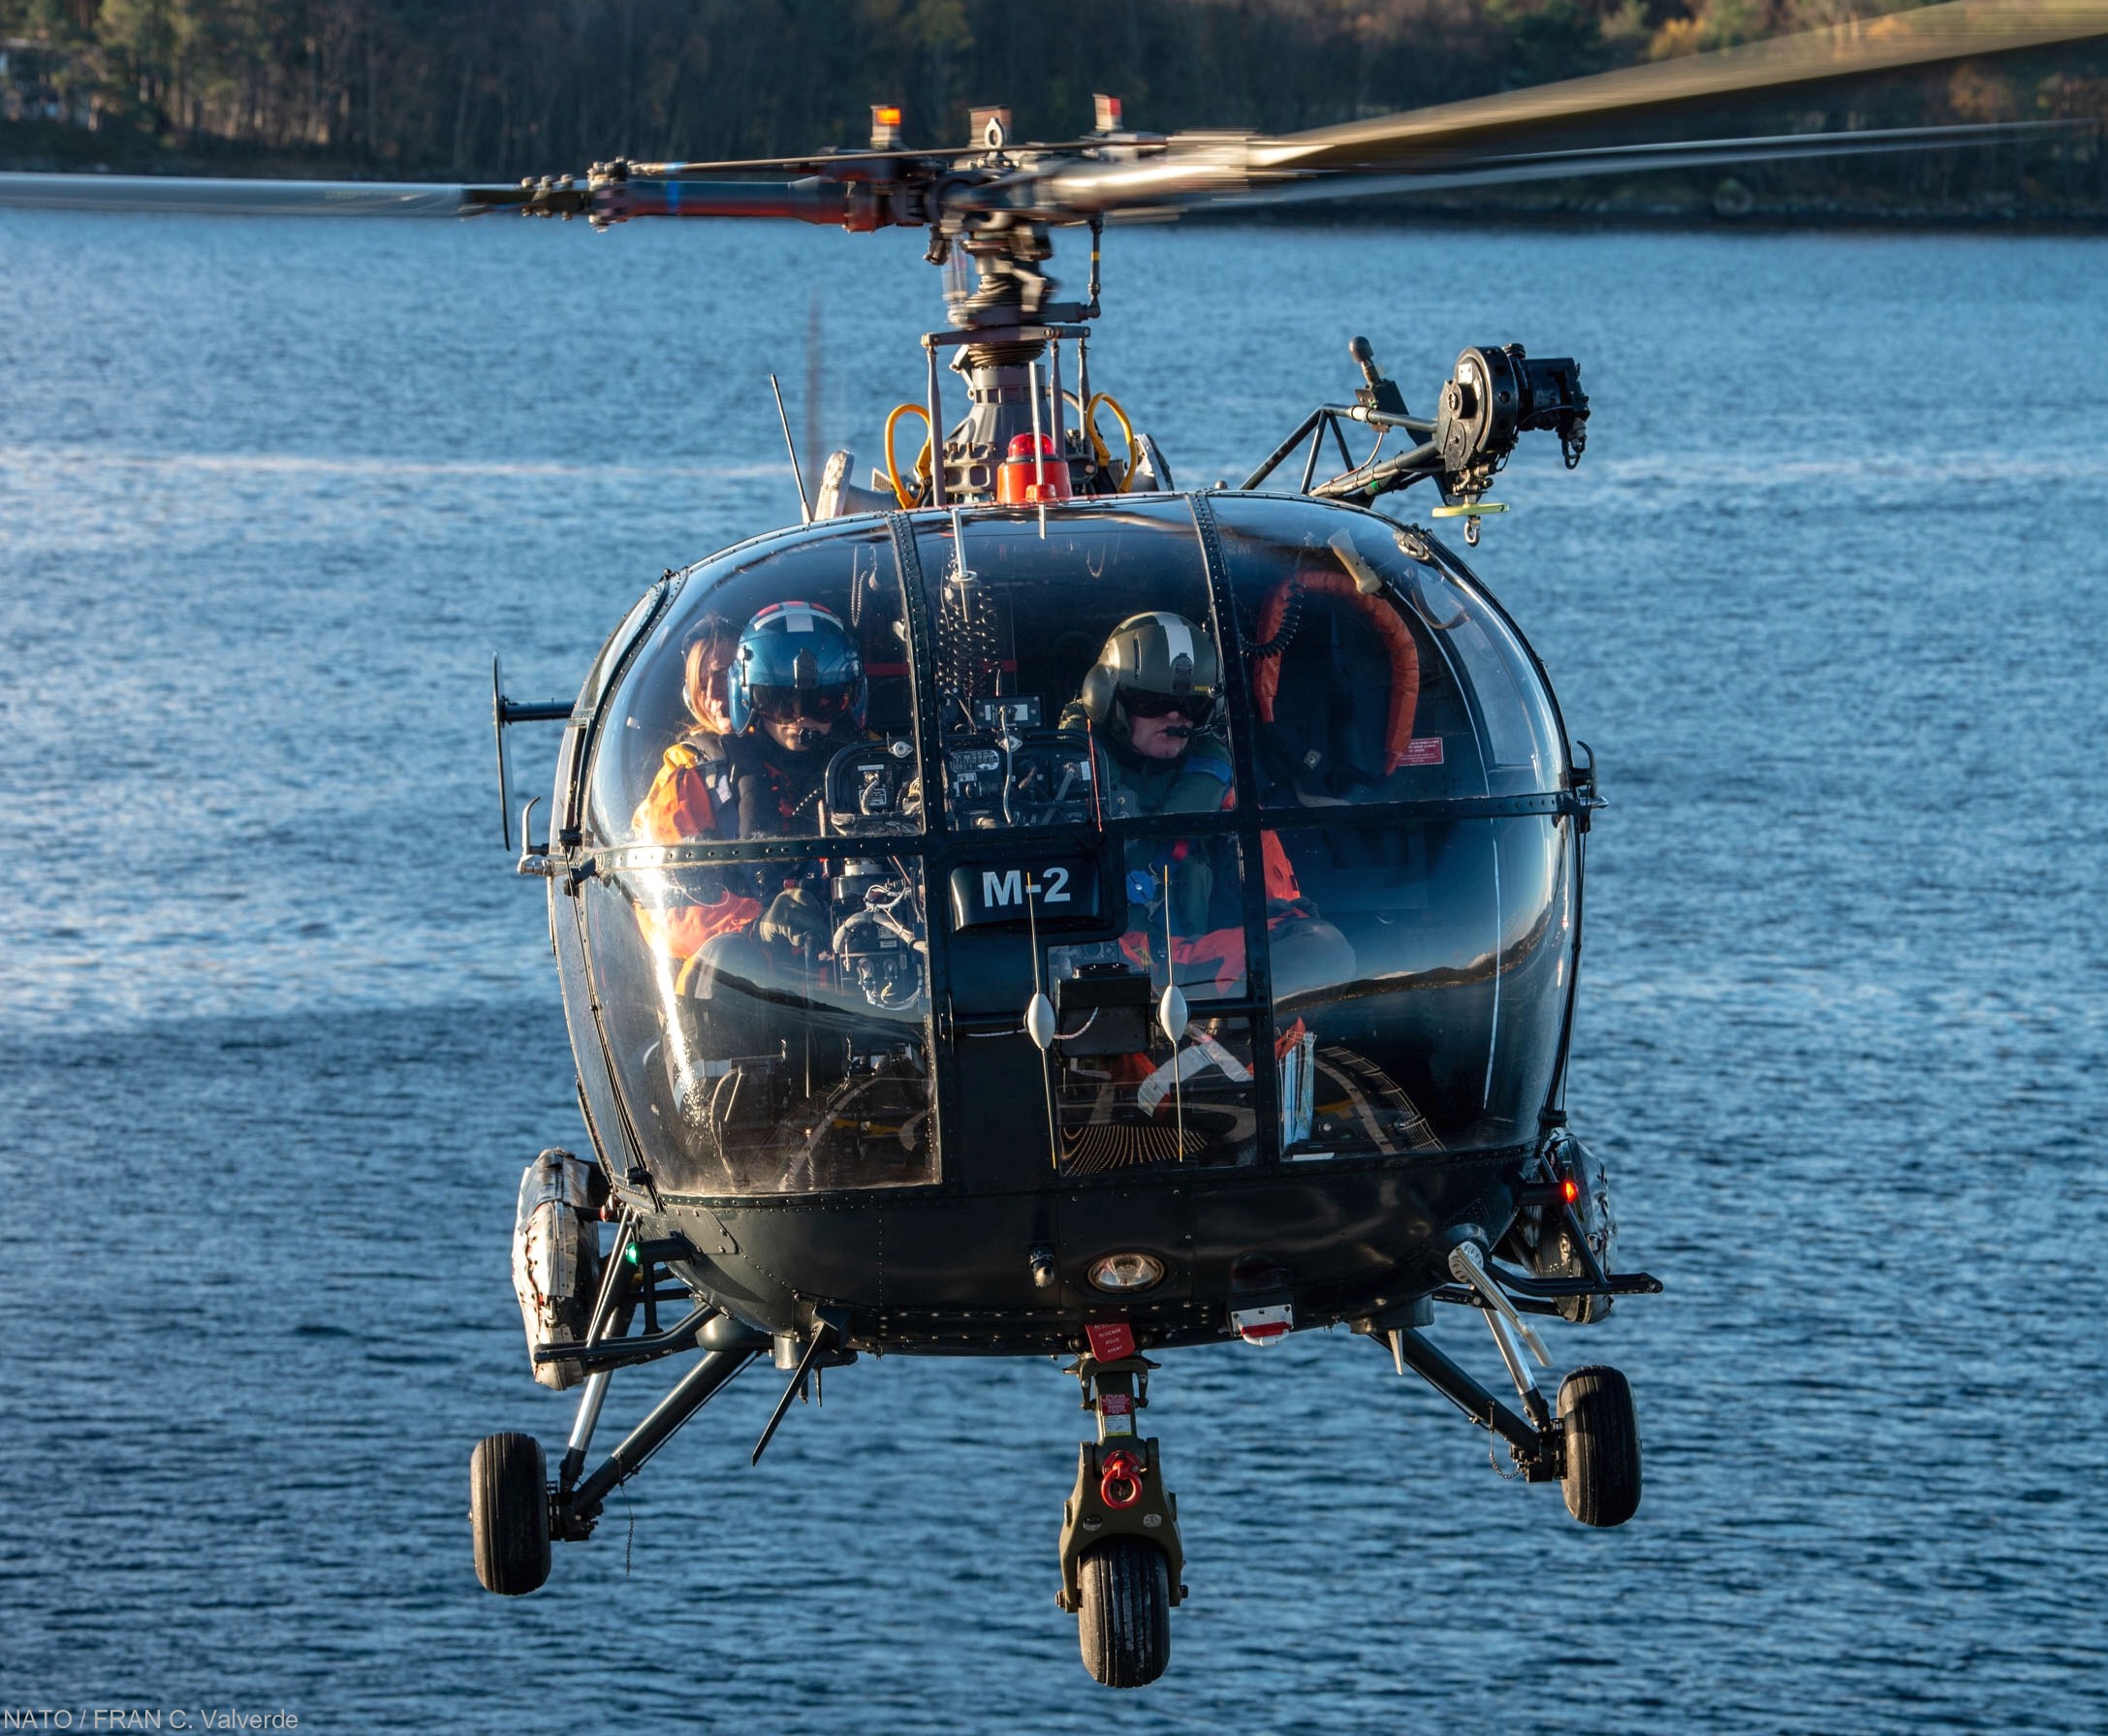 sa-316b alouette iii helicopter belgian armed forces naval component navy 03